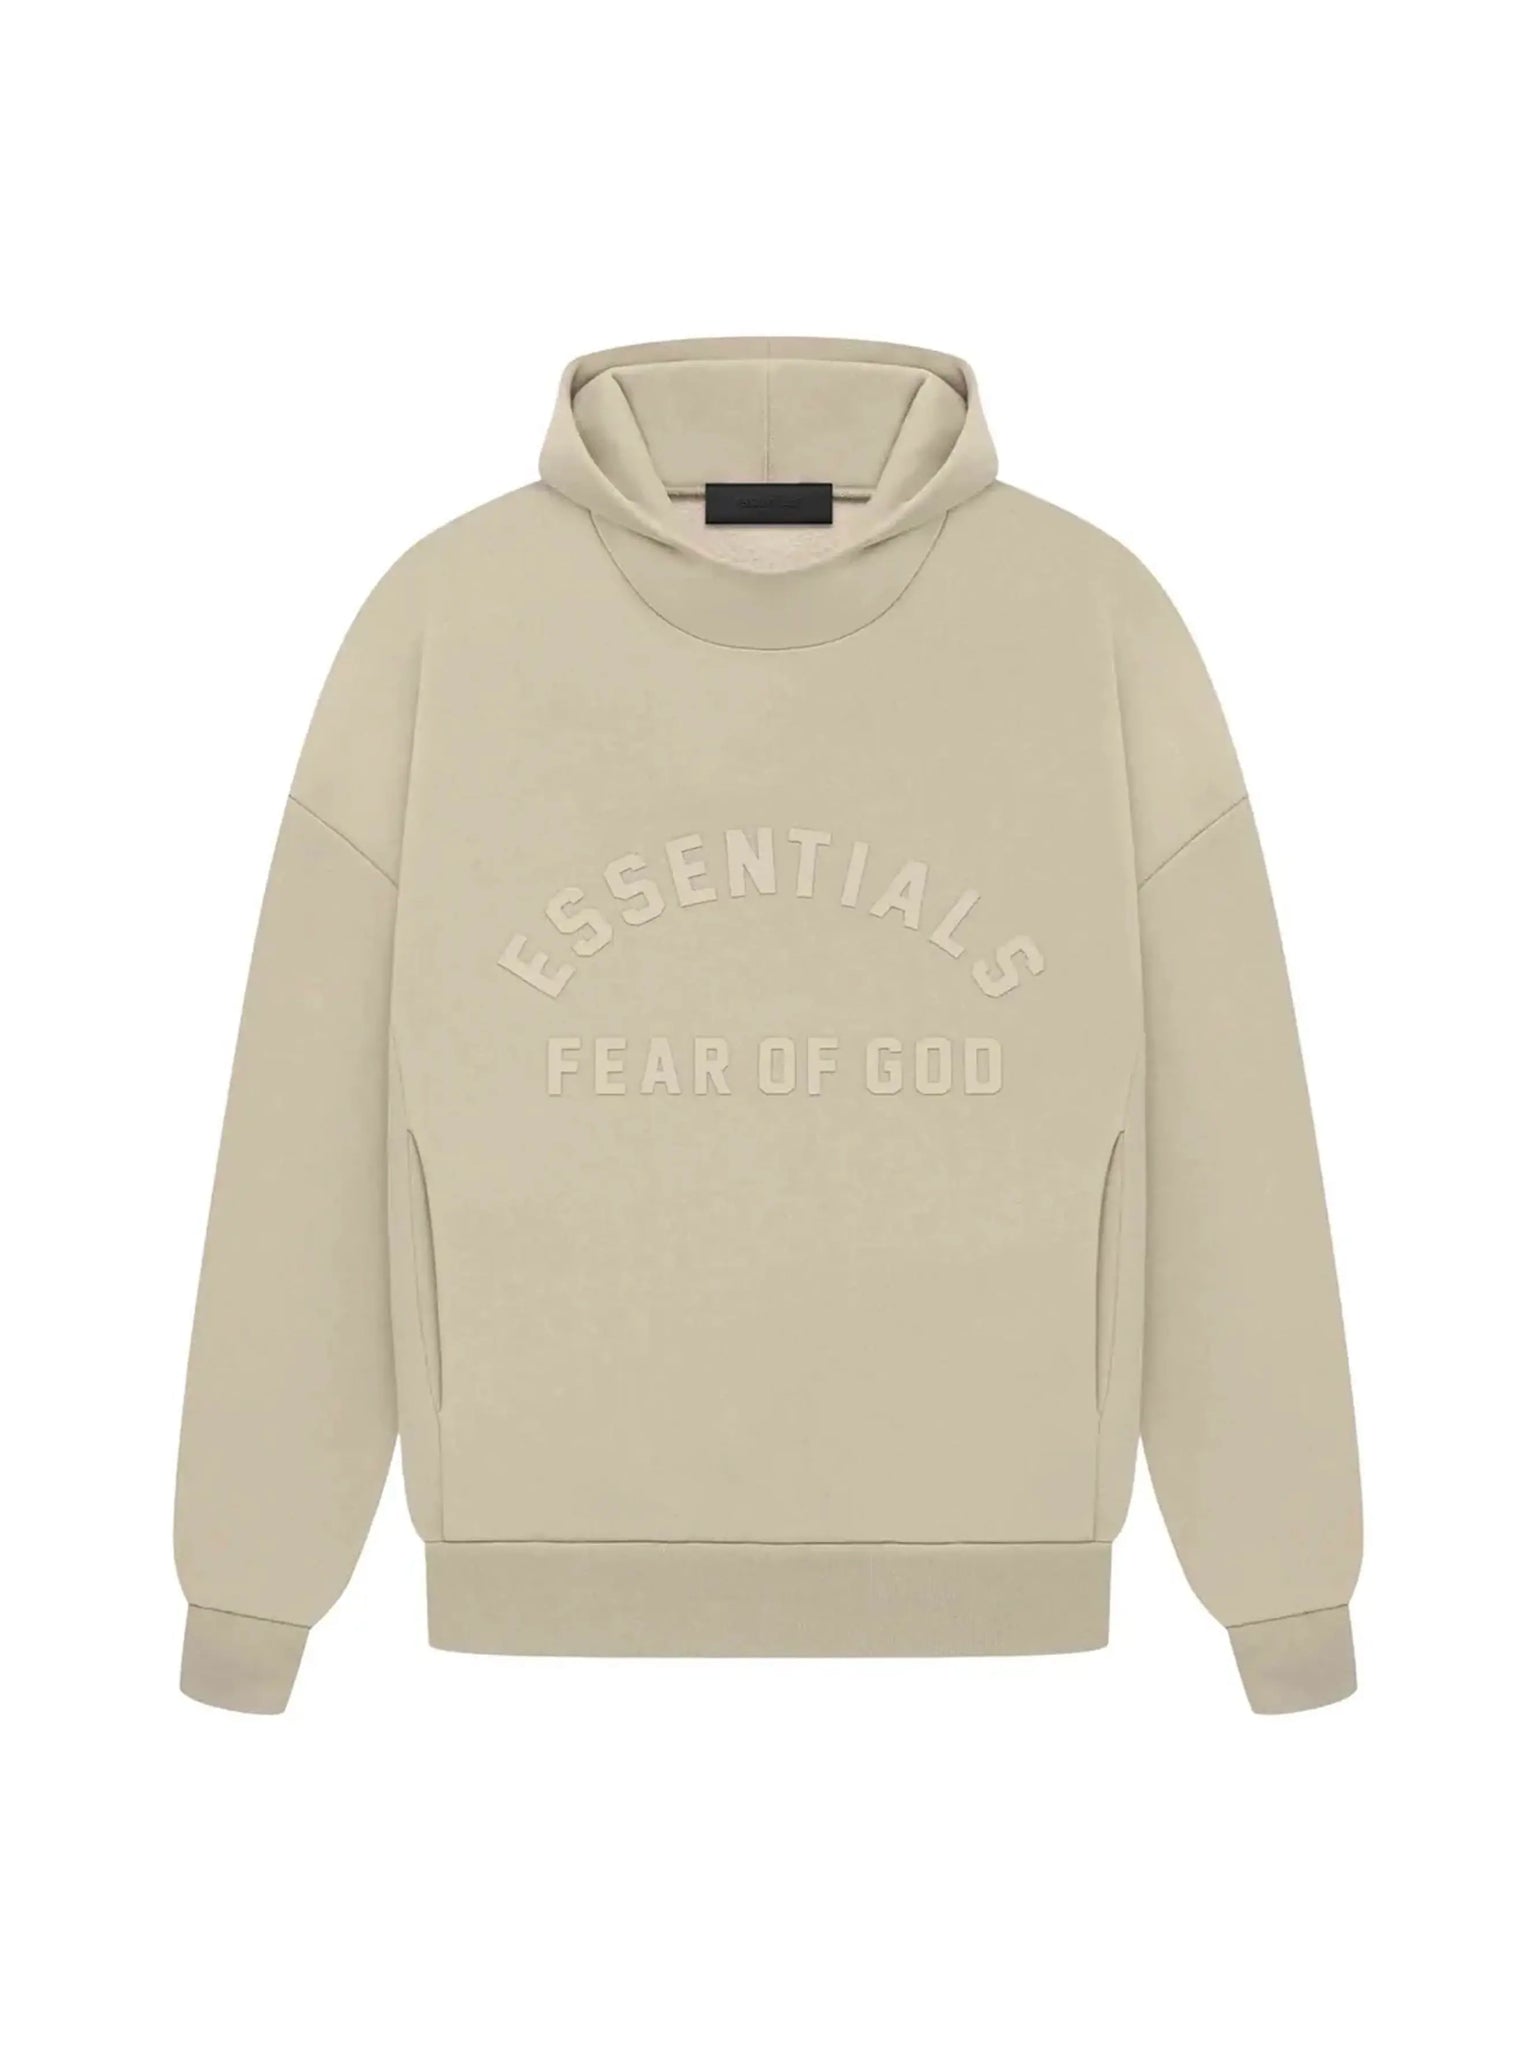 Fear of God Essentials Hoodie Dusty Beige (SS23) in Auckland, New Zealand - Shop name